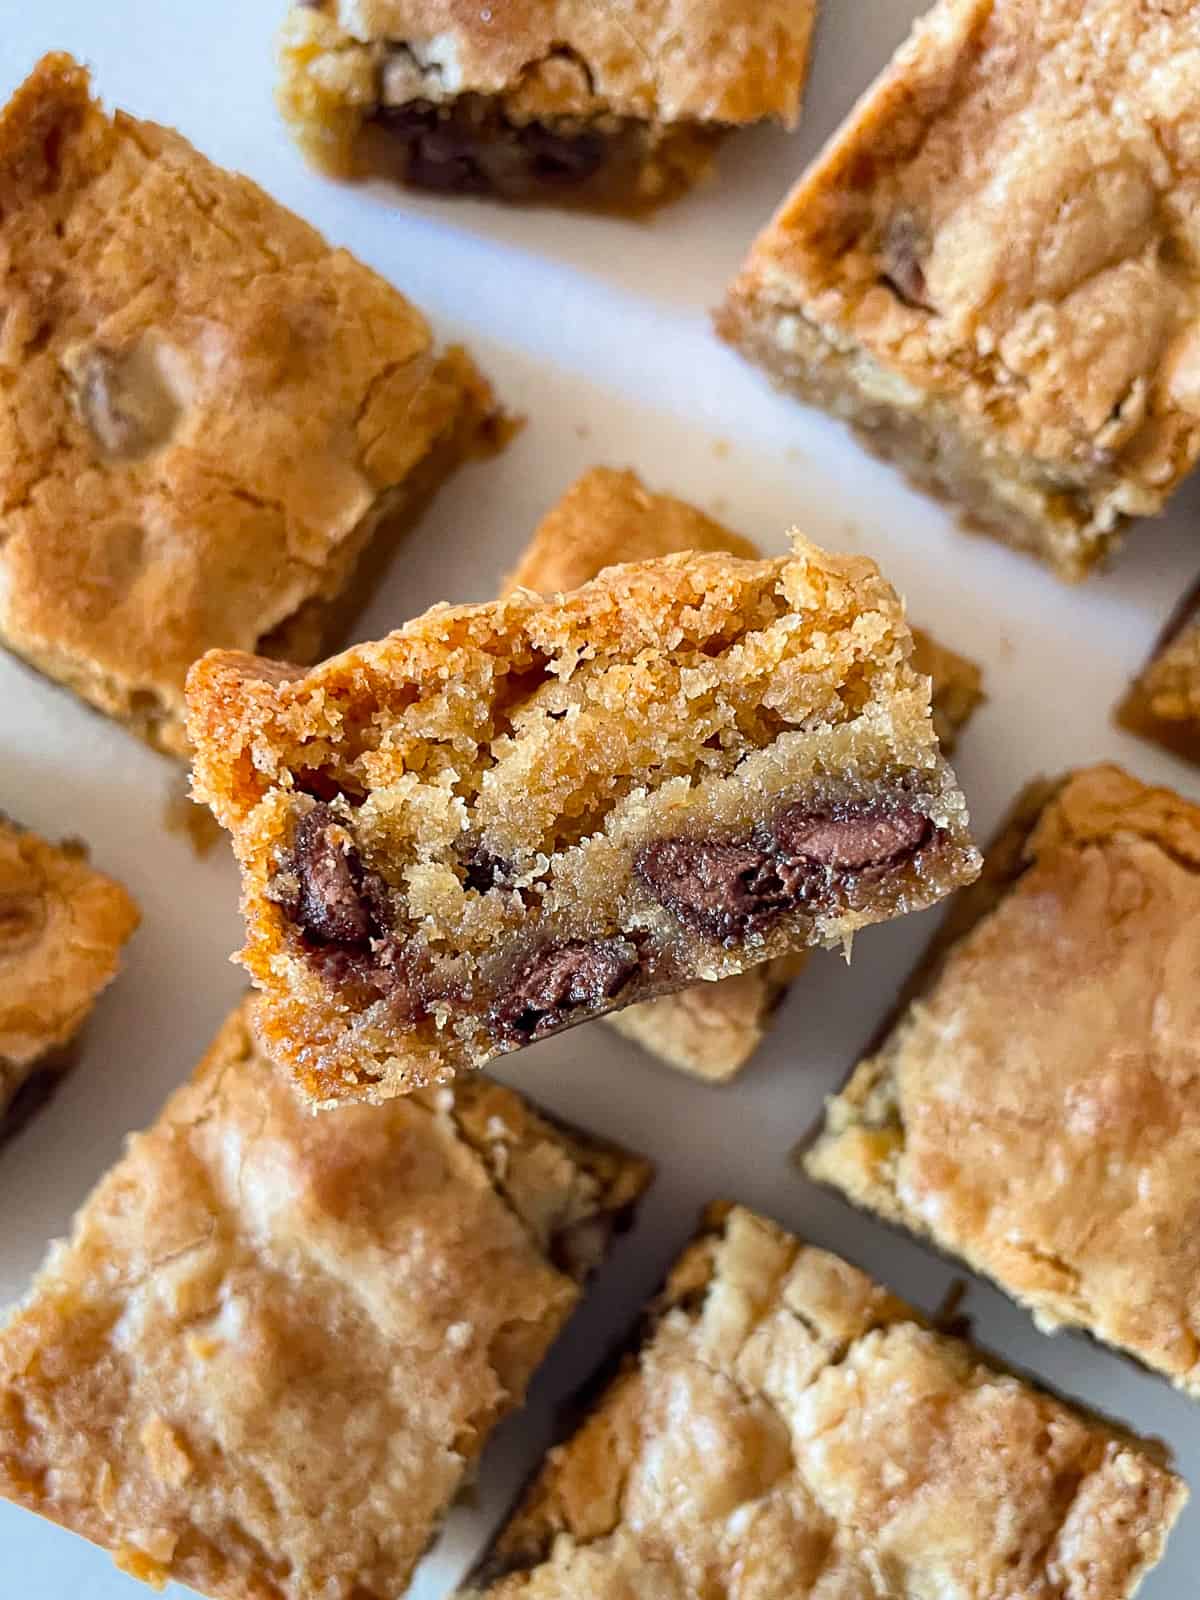 Gluten-free blondies cut into squares. One is stacked on top of the another to show the chocolate chips.